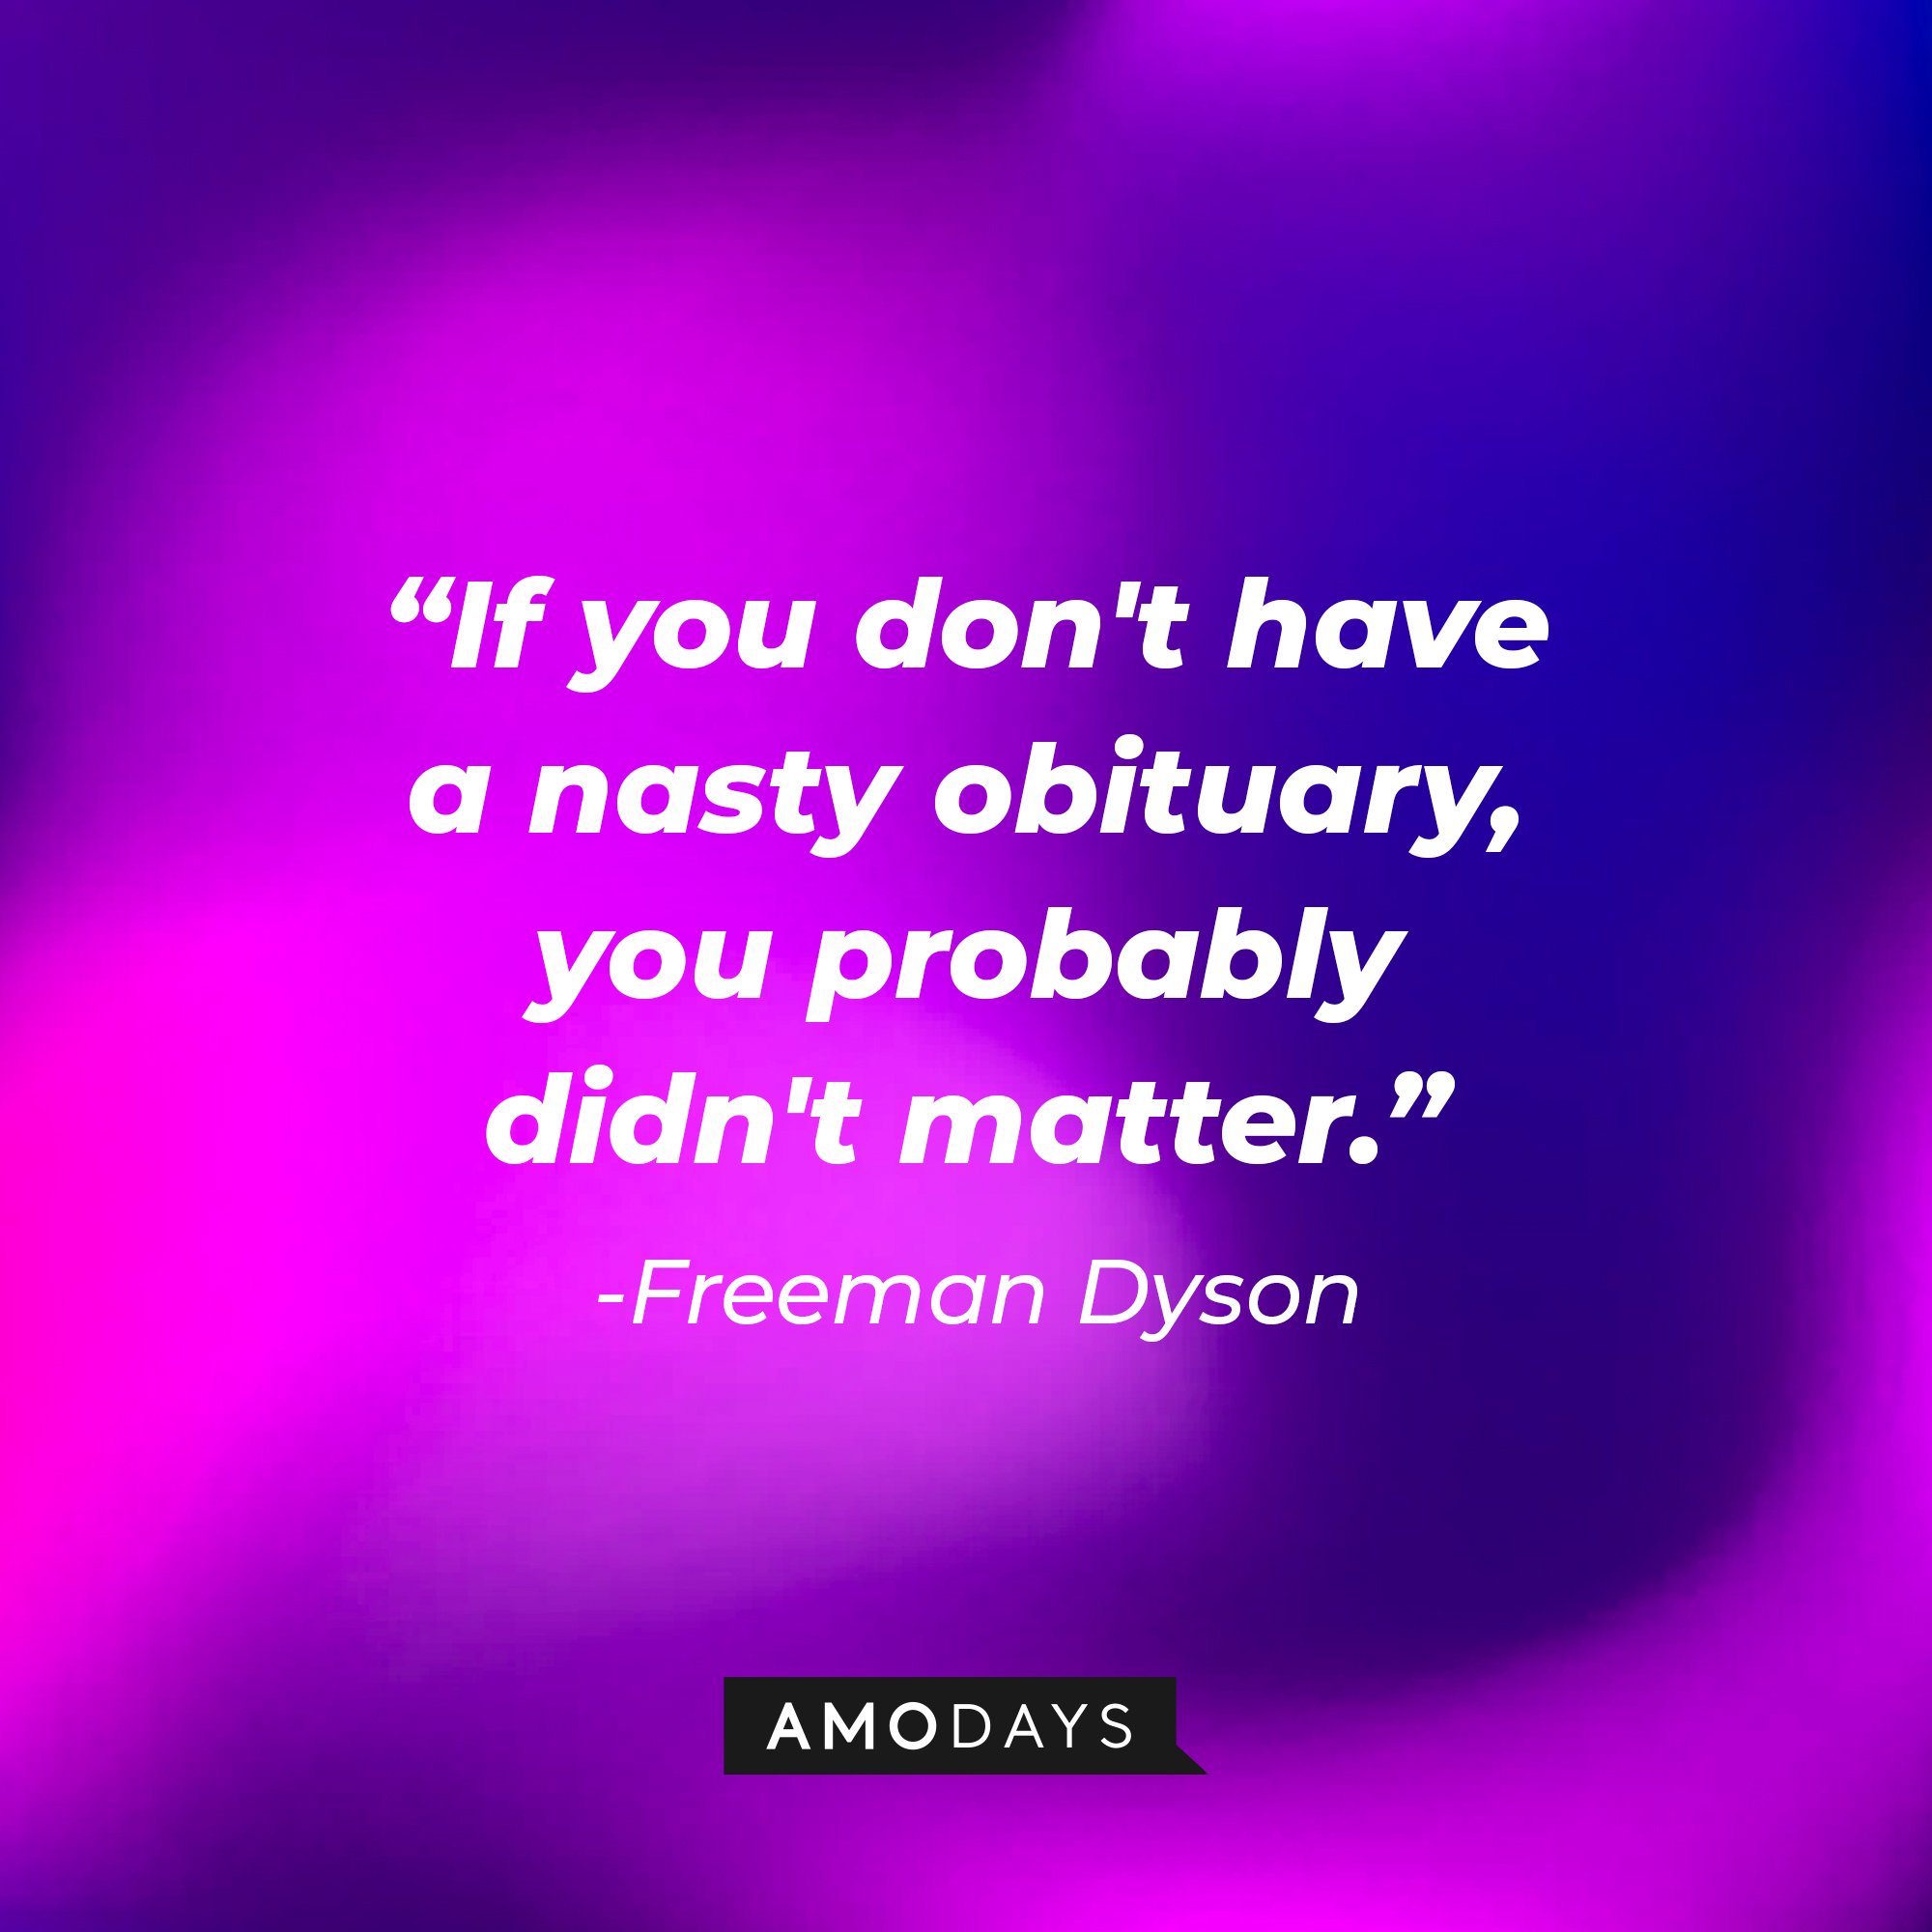 Freeman Dyson's quote:  "If you don't have a nasty obituary, you probably didn't matter." | Image: AmoDays 